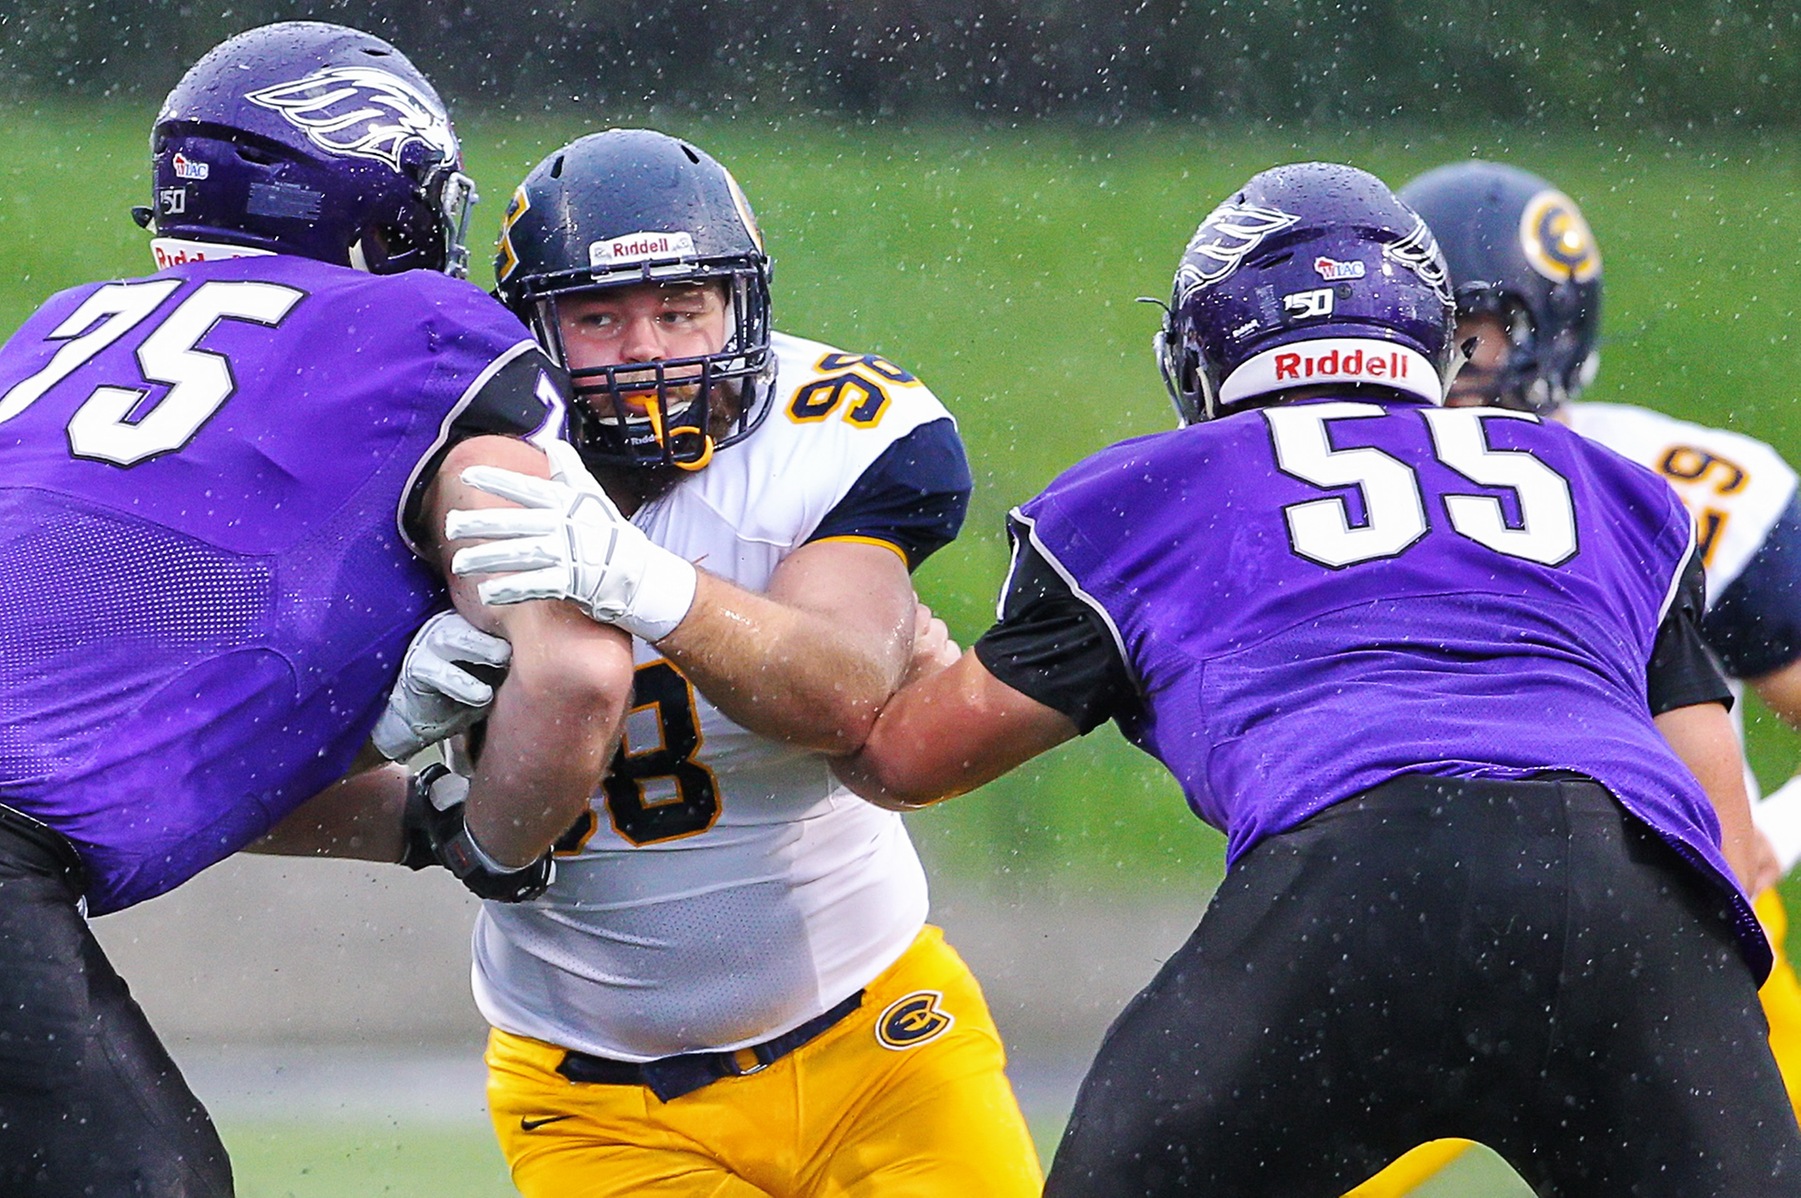 Blugolds fall on the road to No. 3 Whitewater, 24-14